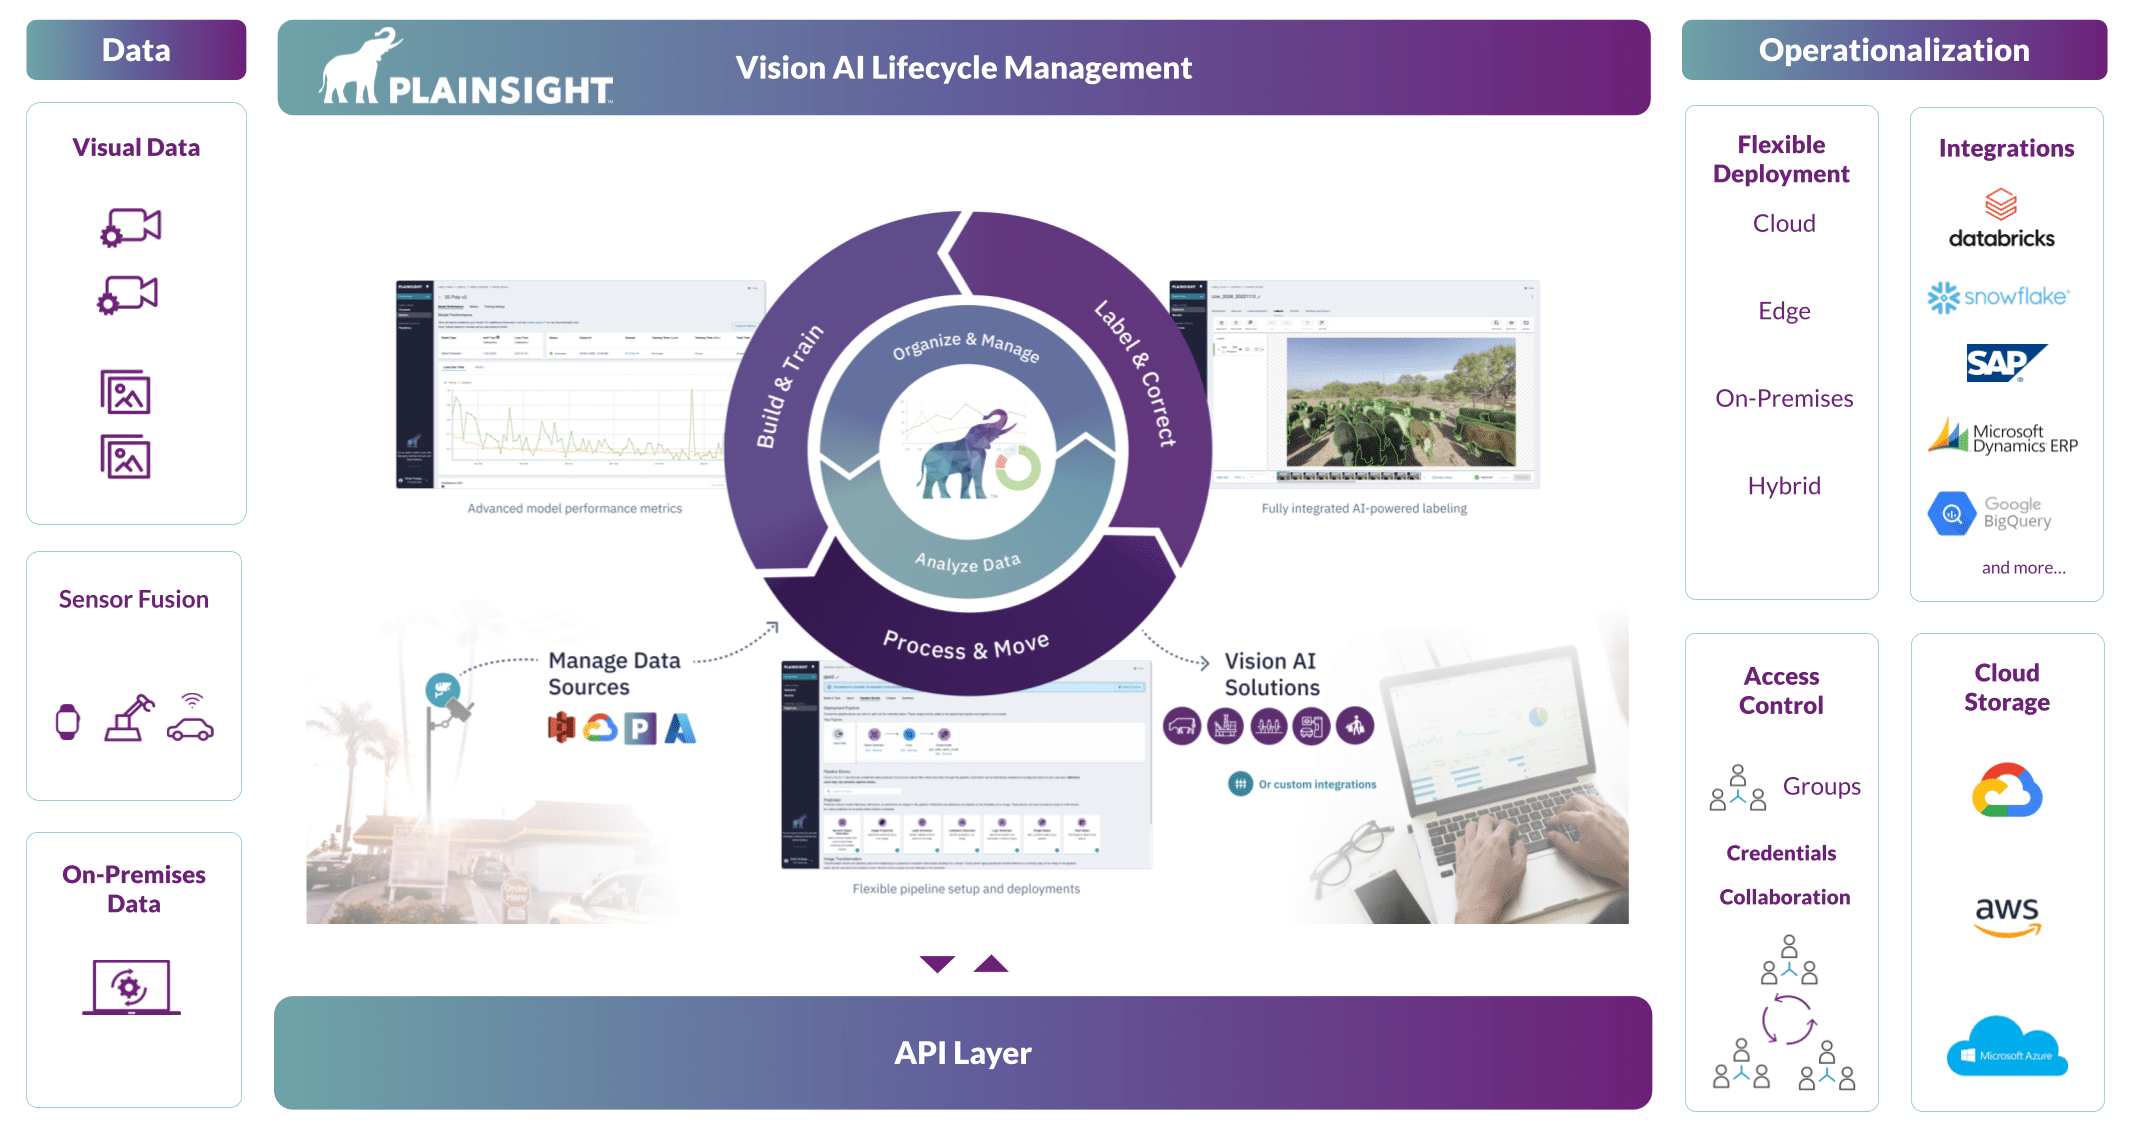 This image is showing the features and capabilities of PLAINSIGHT, a data management platform, including cloud and on-premises deployment, data annotation, model training, and collaboration.